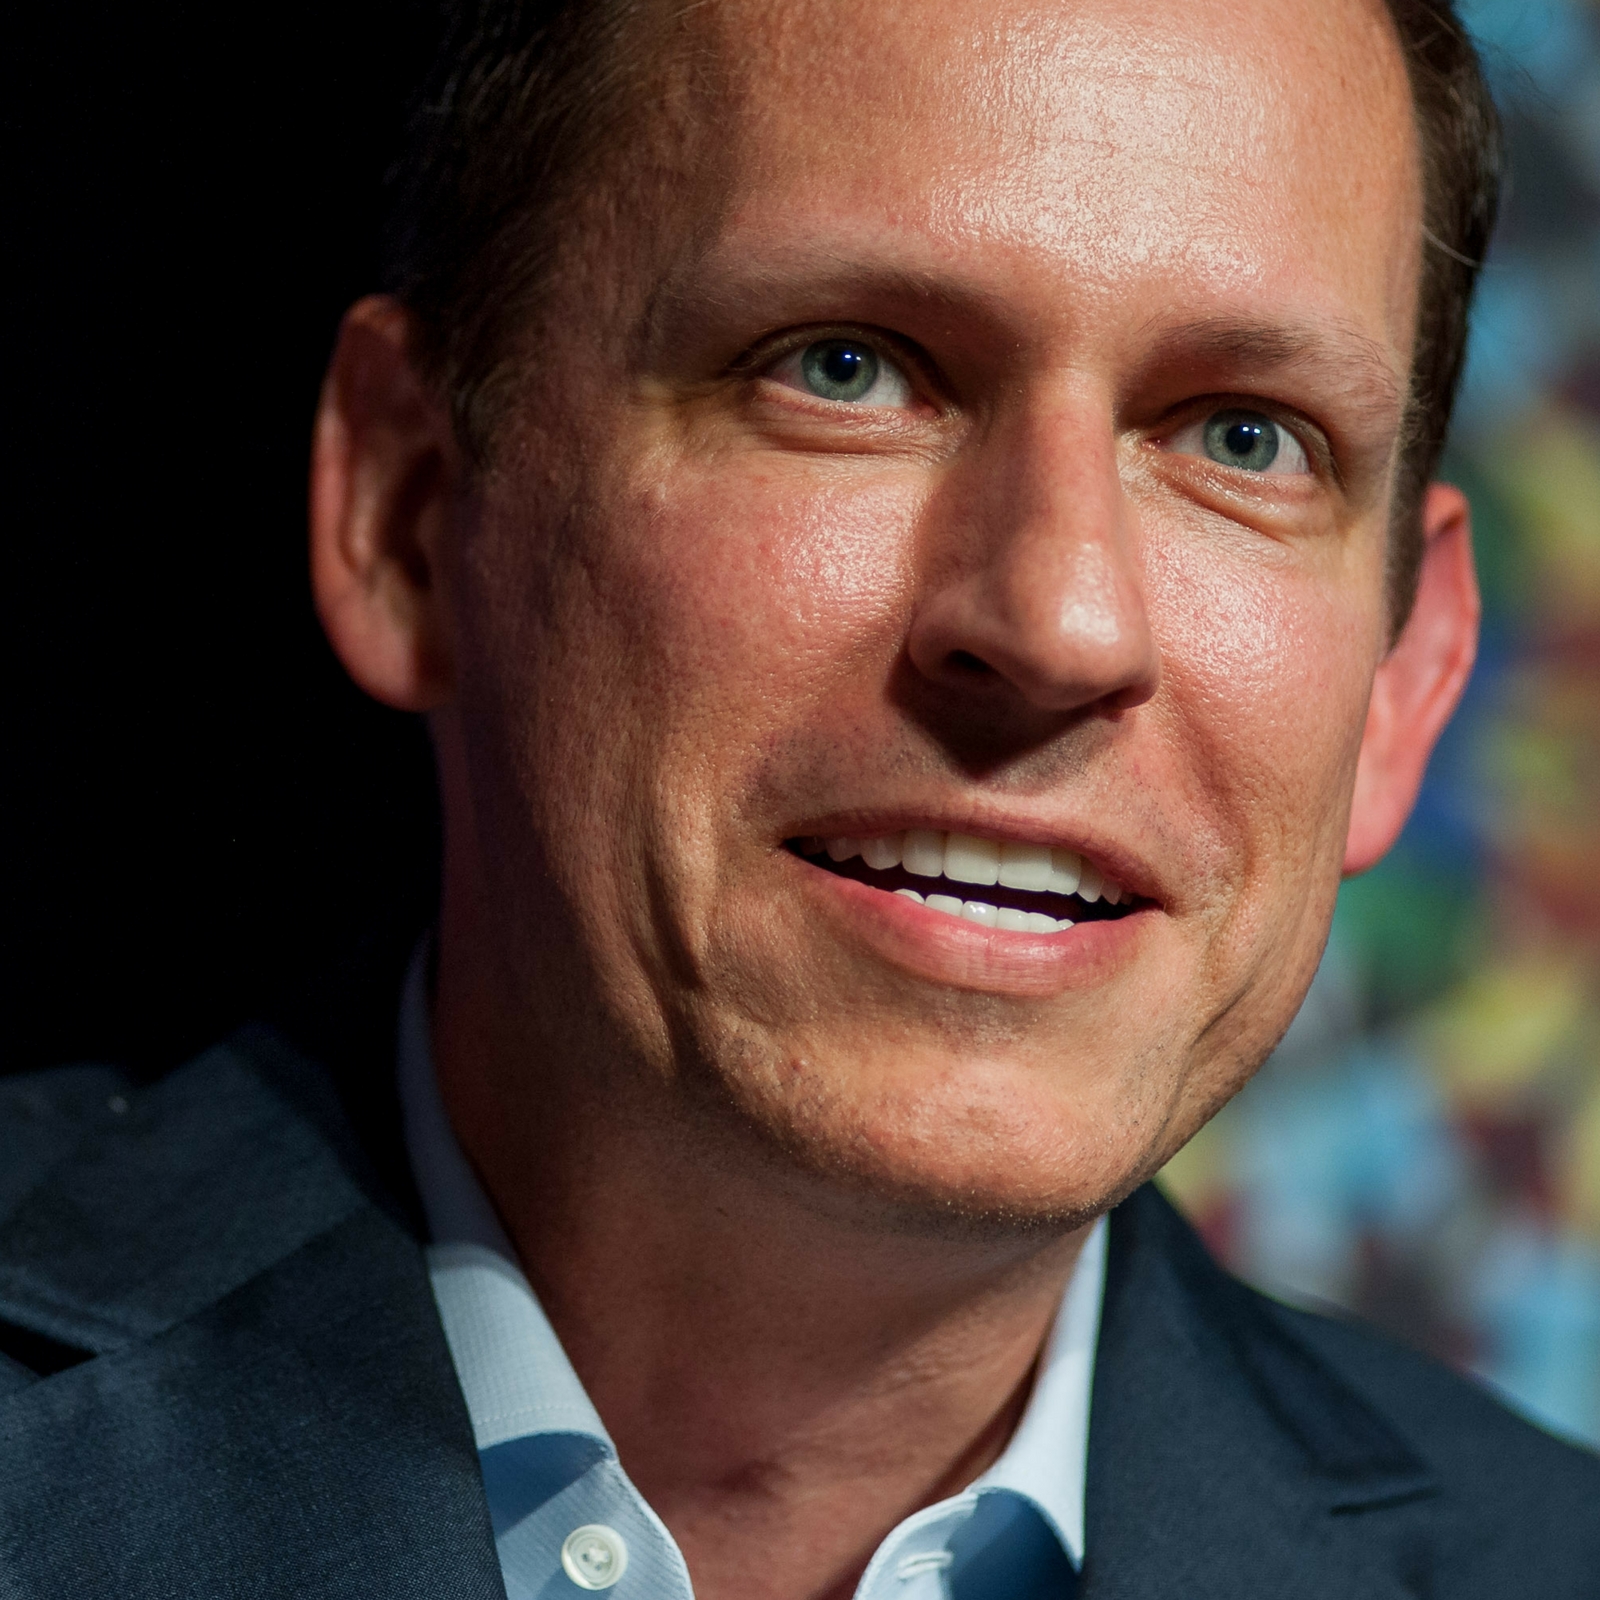 Peter Thiel is Long on Bitcoin, a "Deeply Contrarian" Investment Missed by Wall Street and Silicon Valley